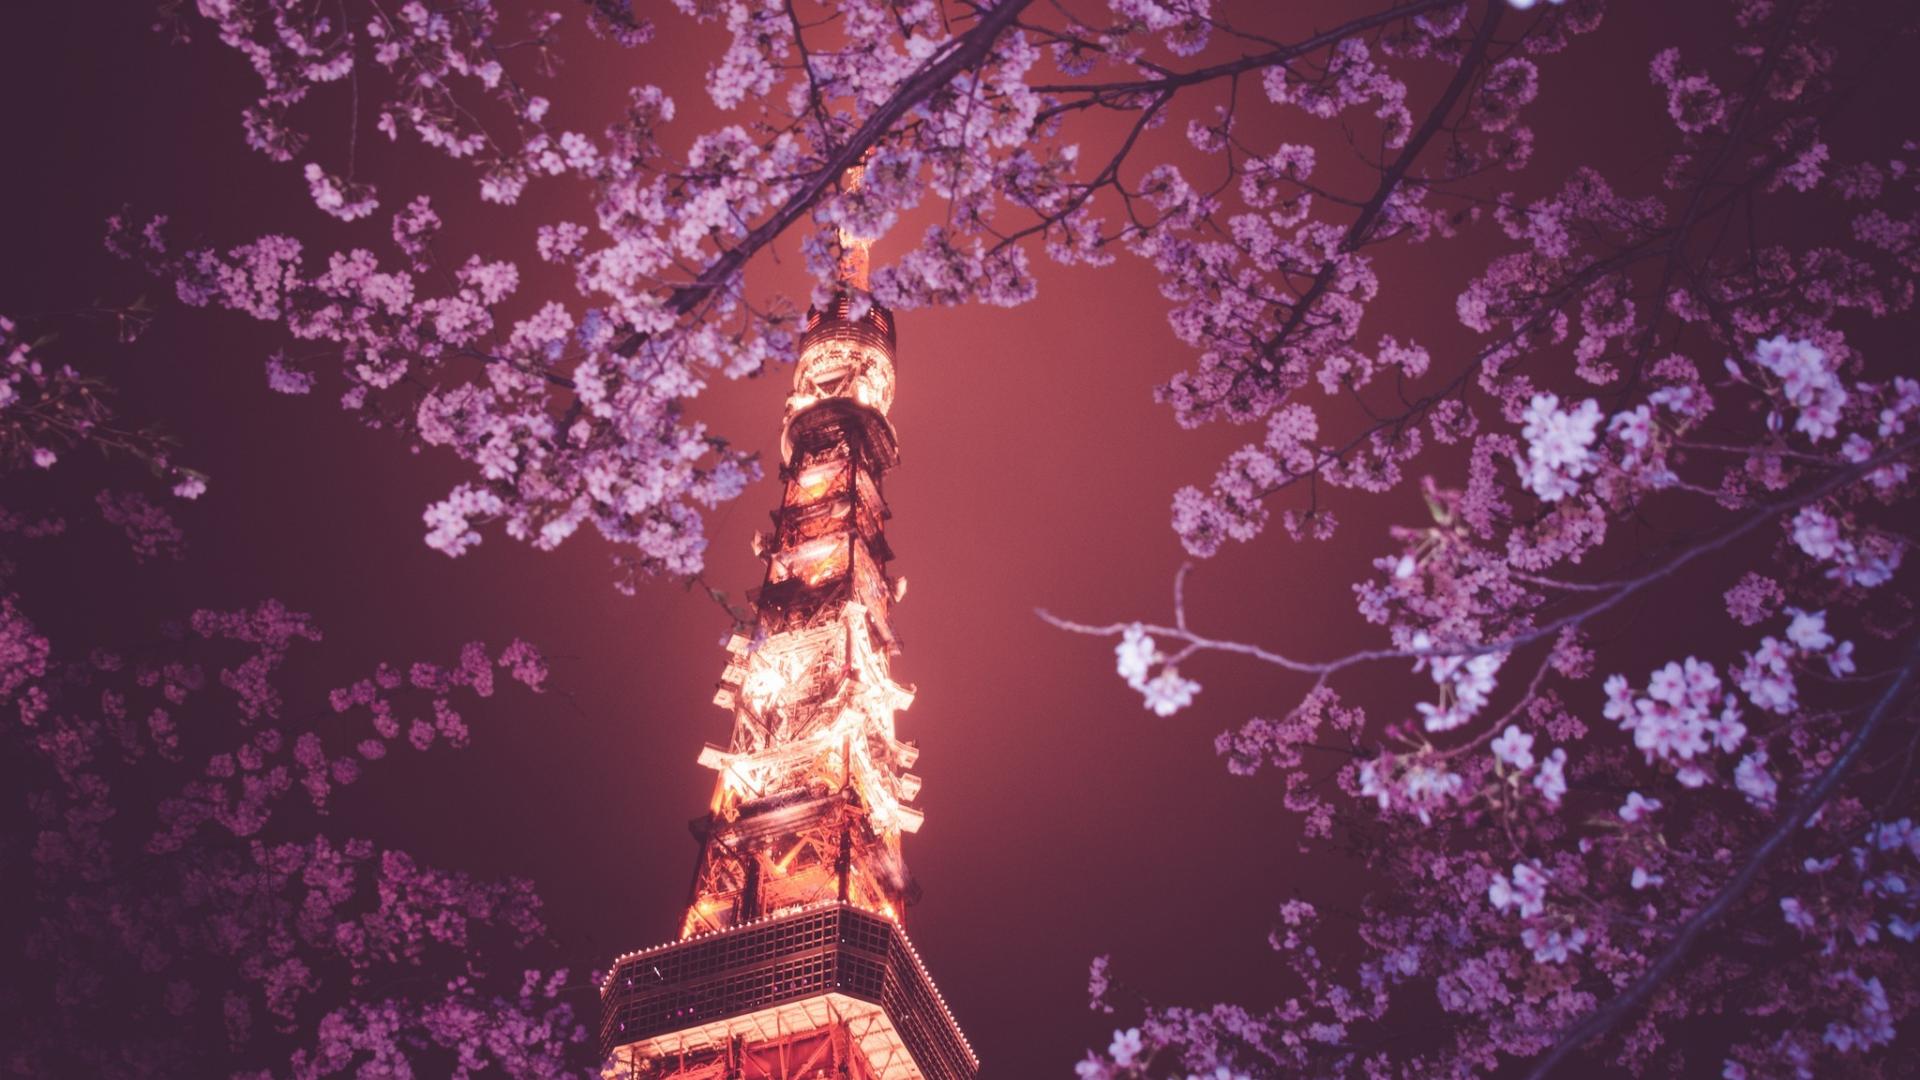 Tokyo Tower and cherry blossoms in the night - Cherry blossom